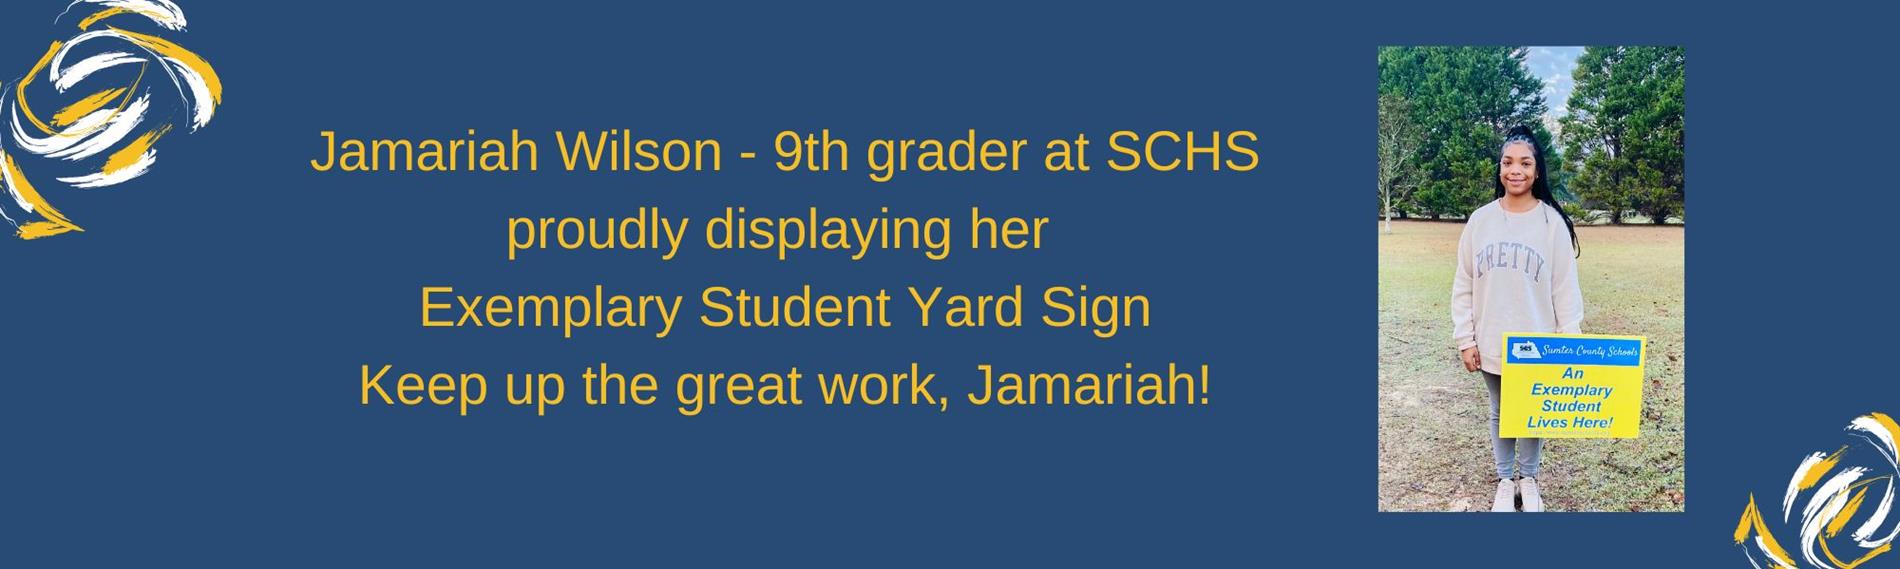 Jamariah Wilson - 9th grader at SCHS proudly displaying her  Exemplary Student Yard Sign